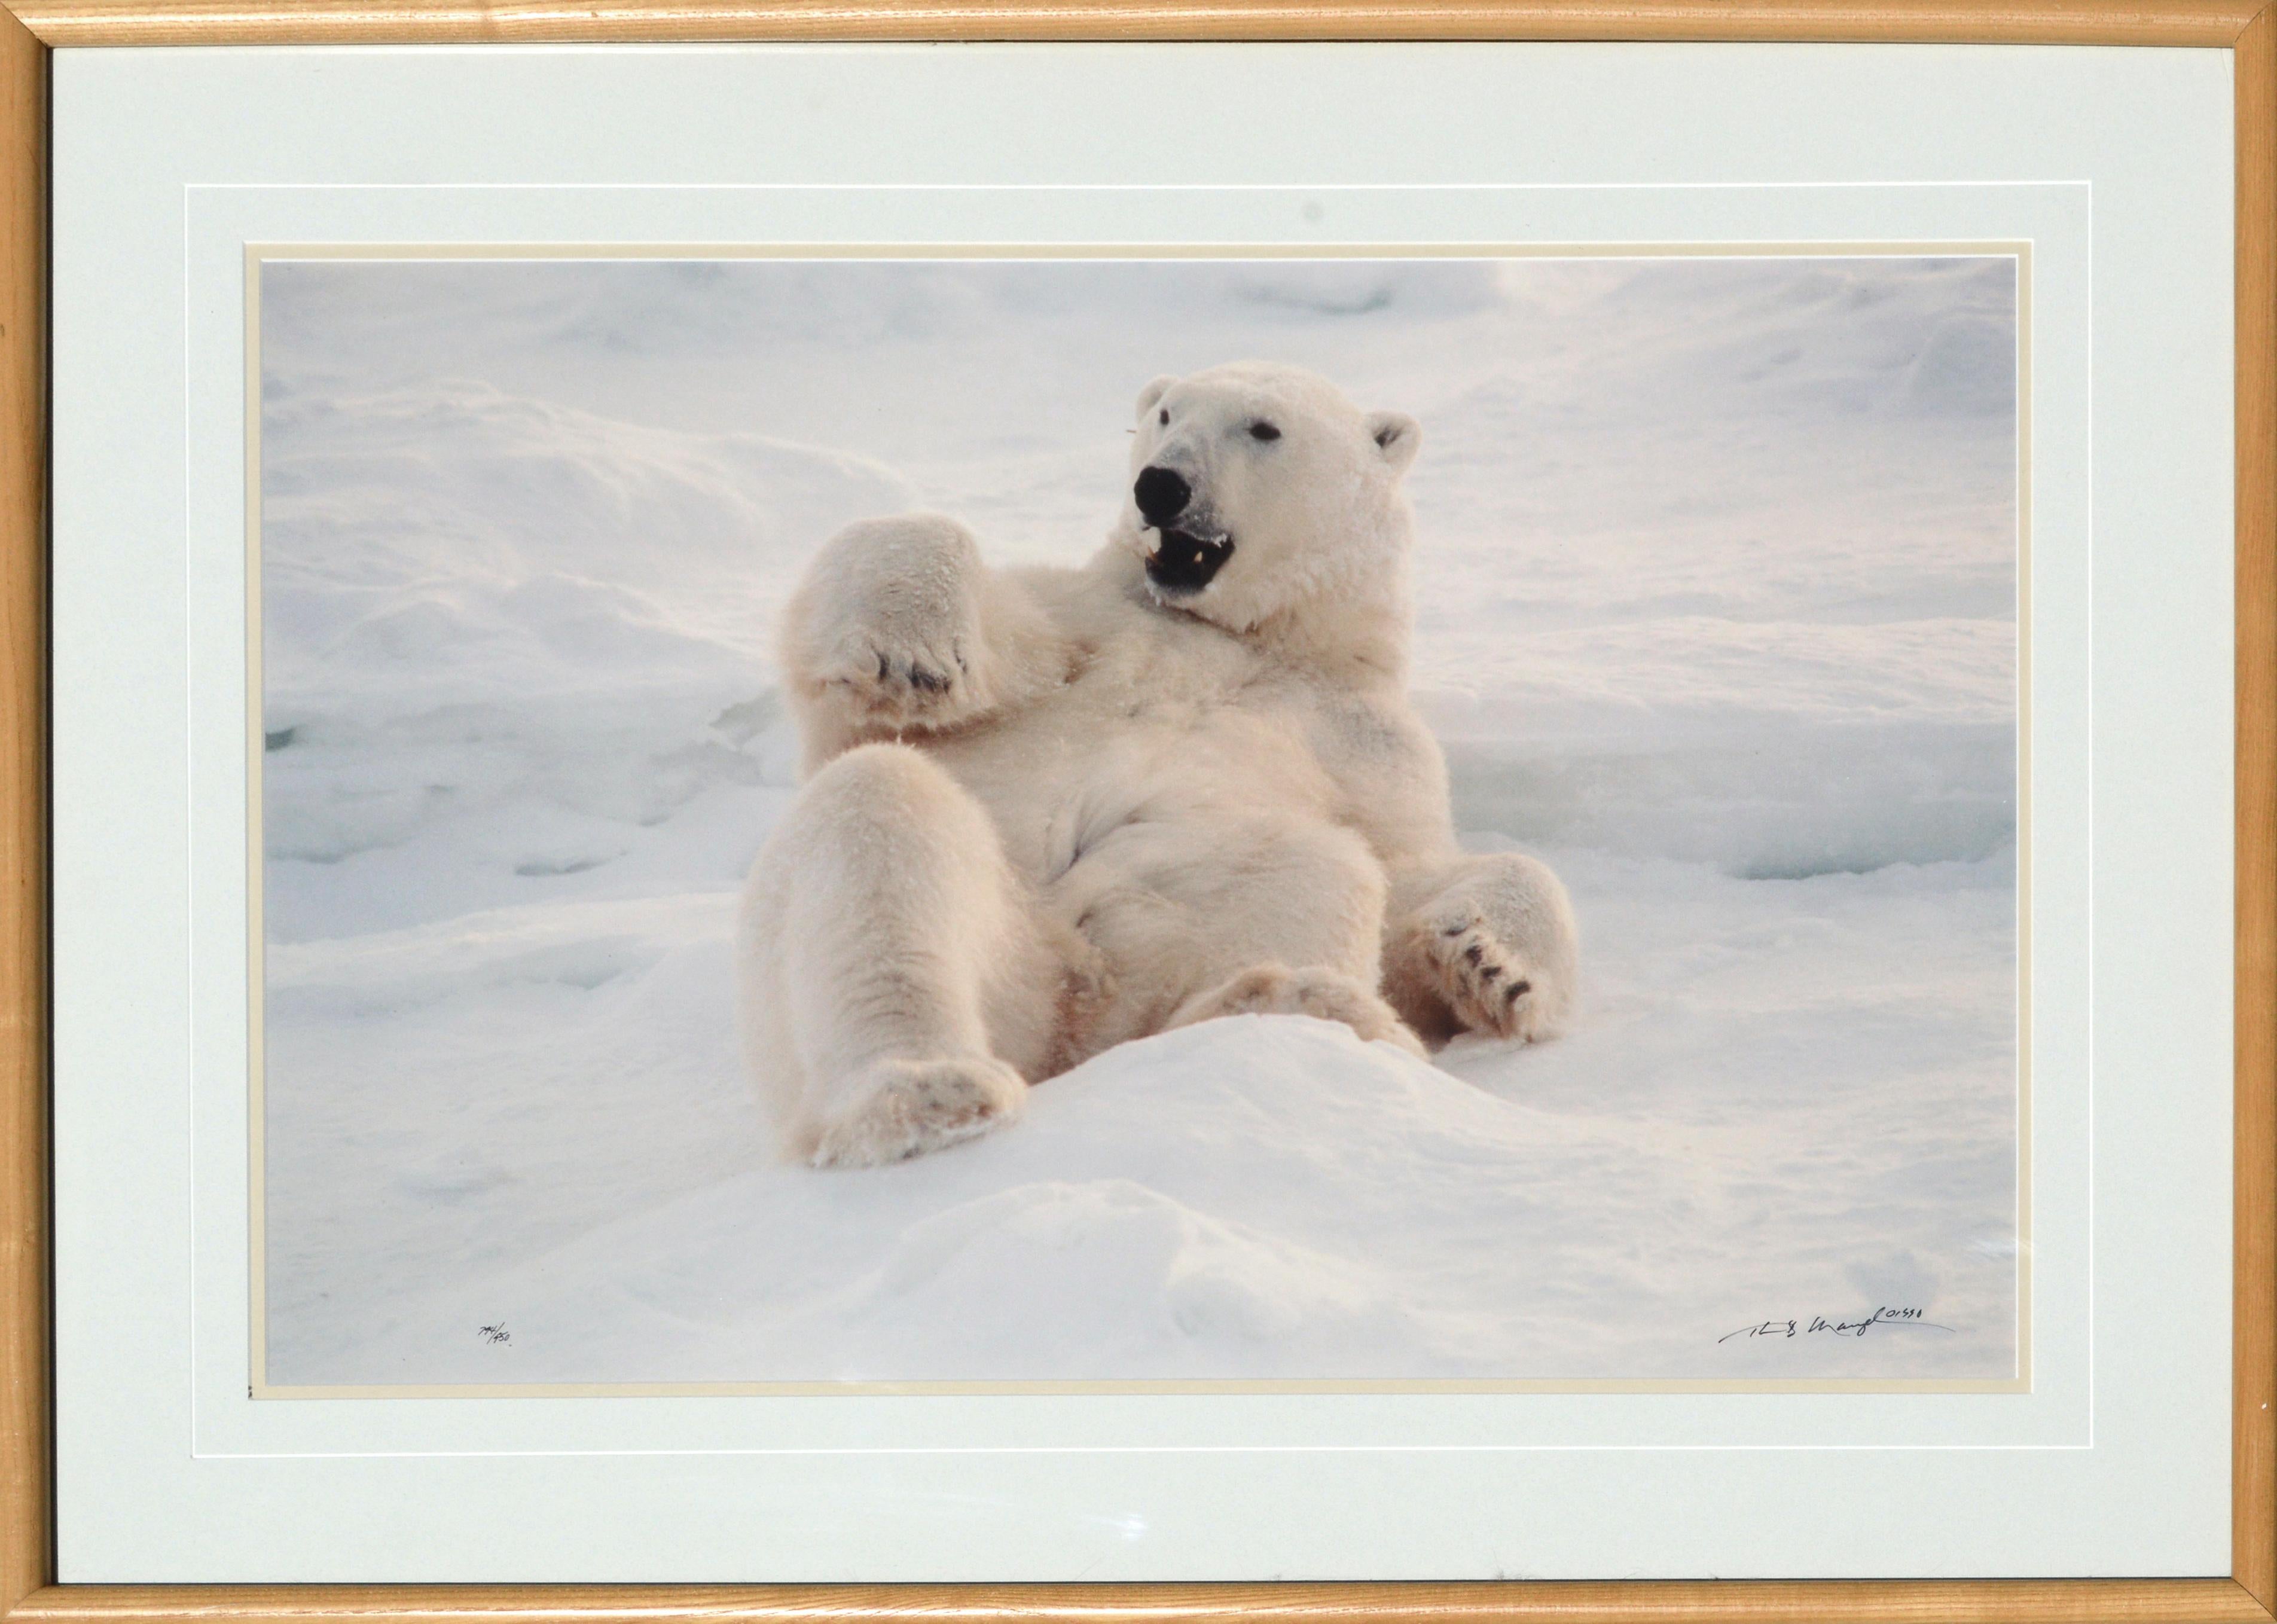 "Feels Good" Polar Bear Photograph - Signed and Numbered Limited Edition 